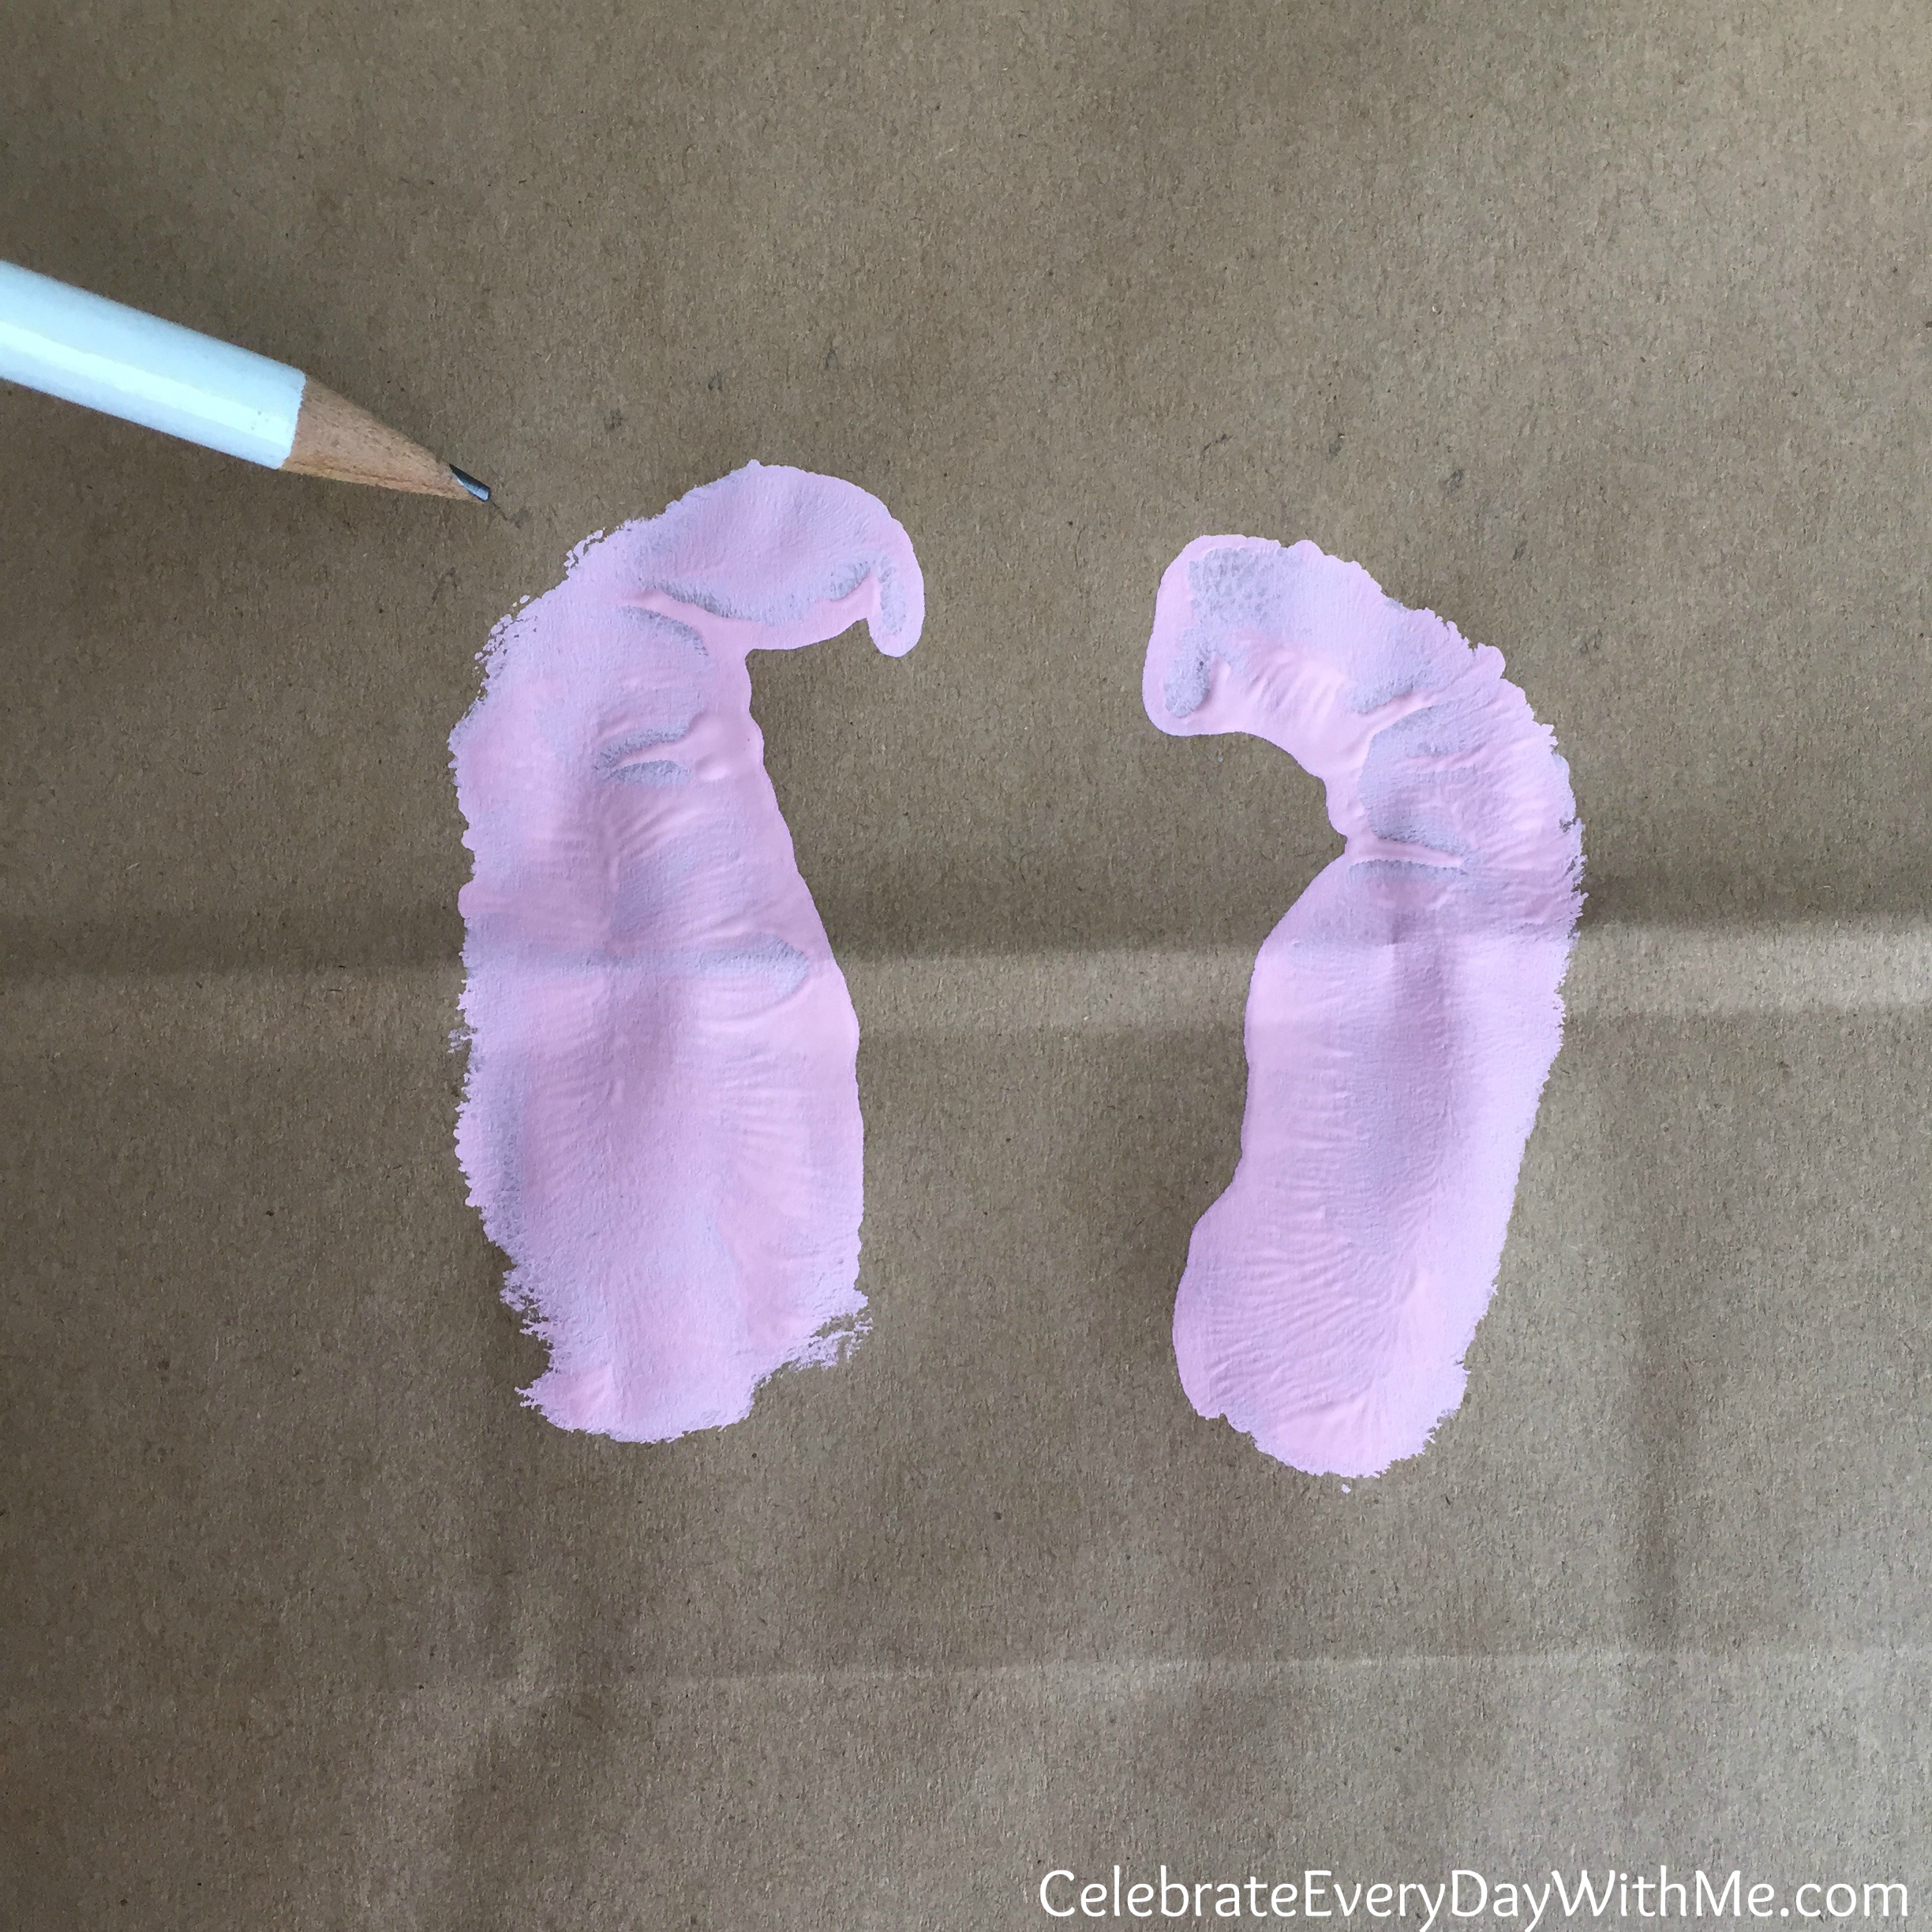 how-to-make-baby-footprints-with-your-hand-celebrate-every-day-with-me